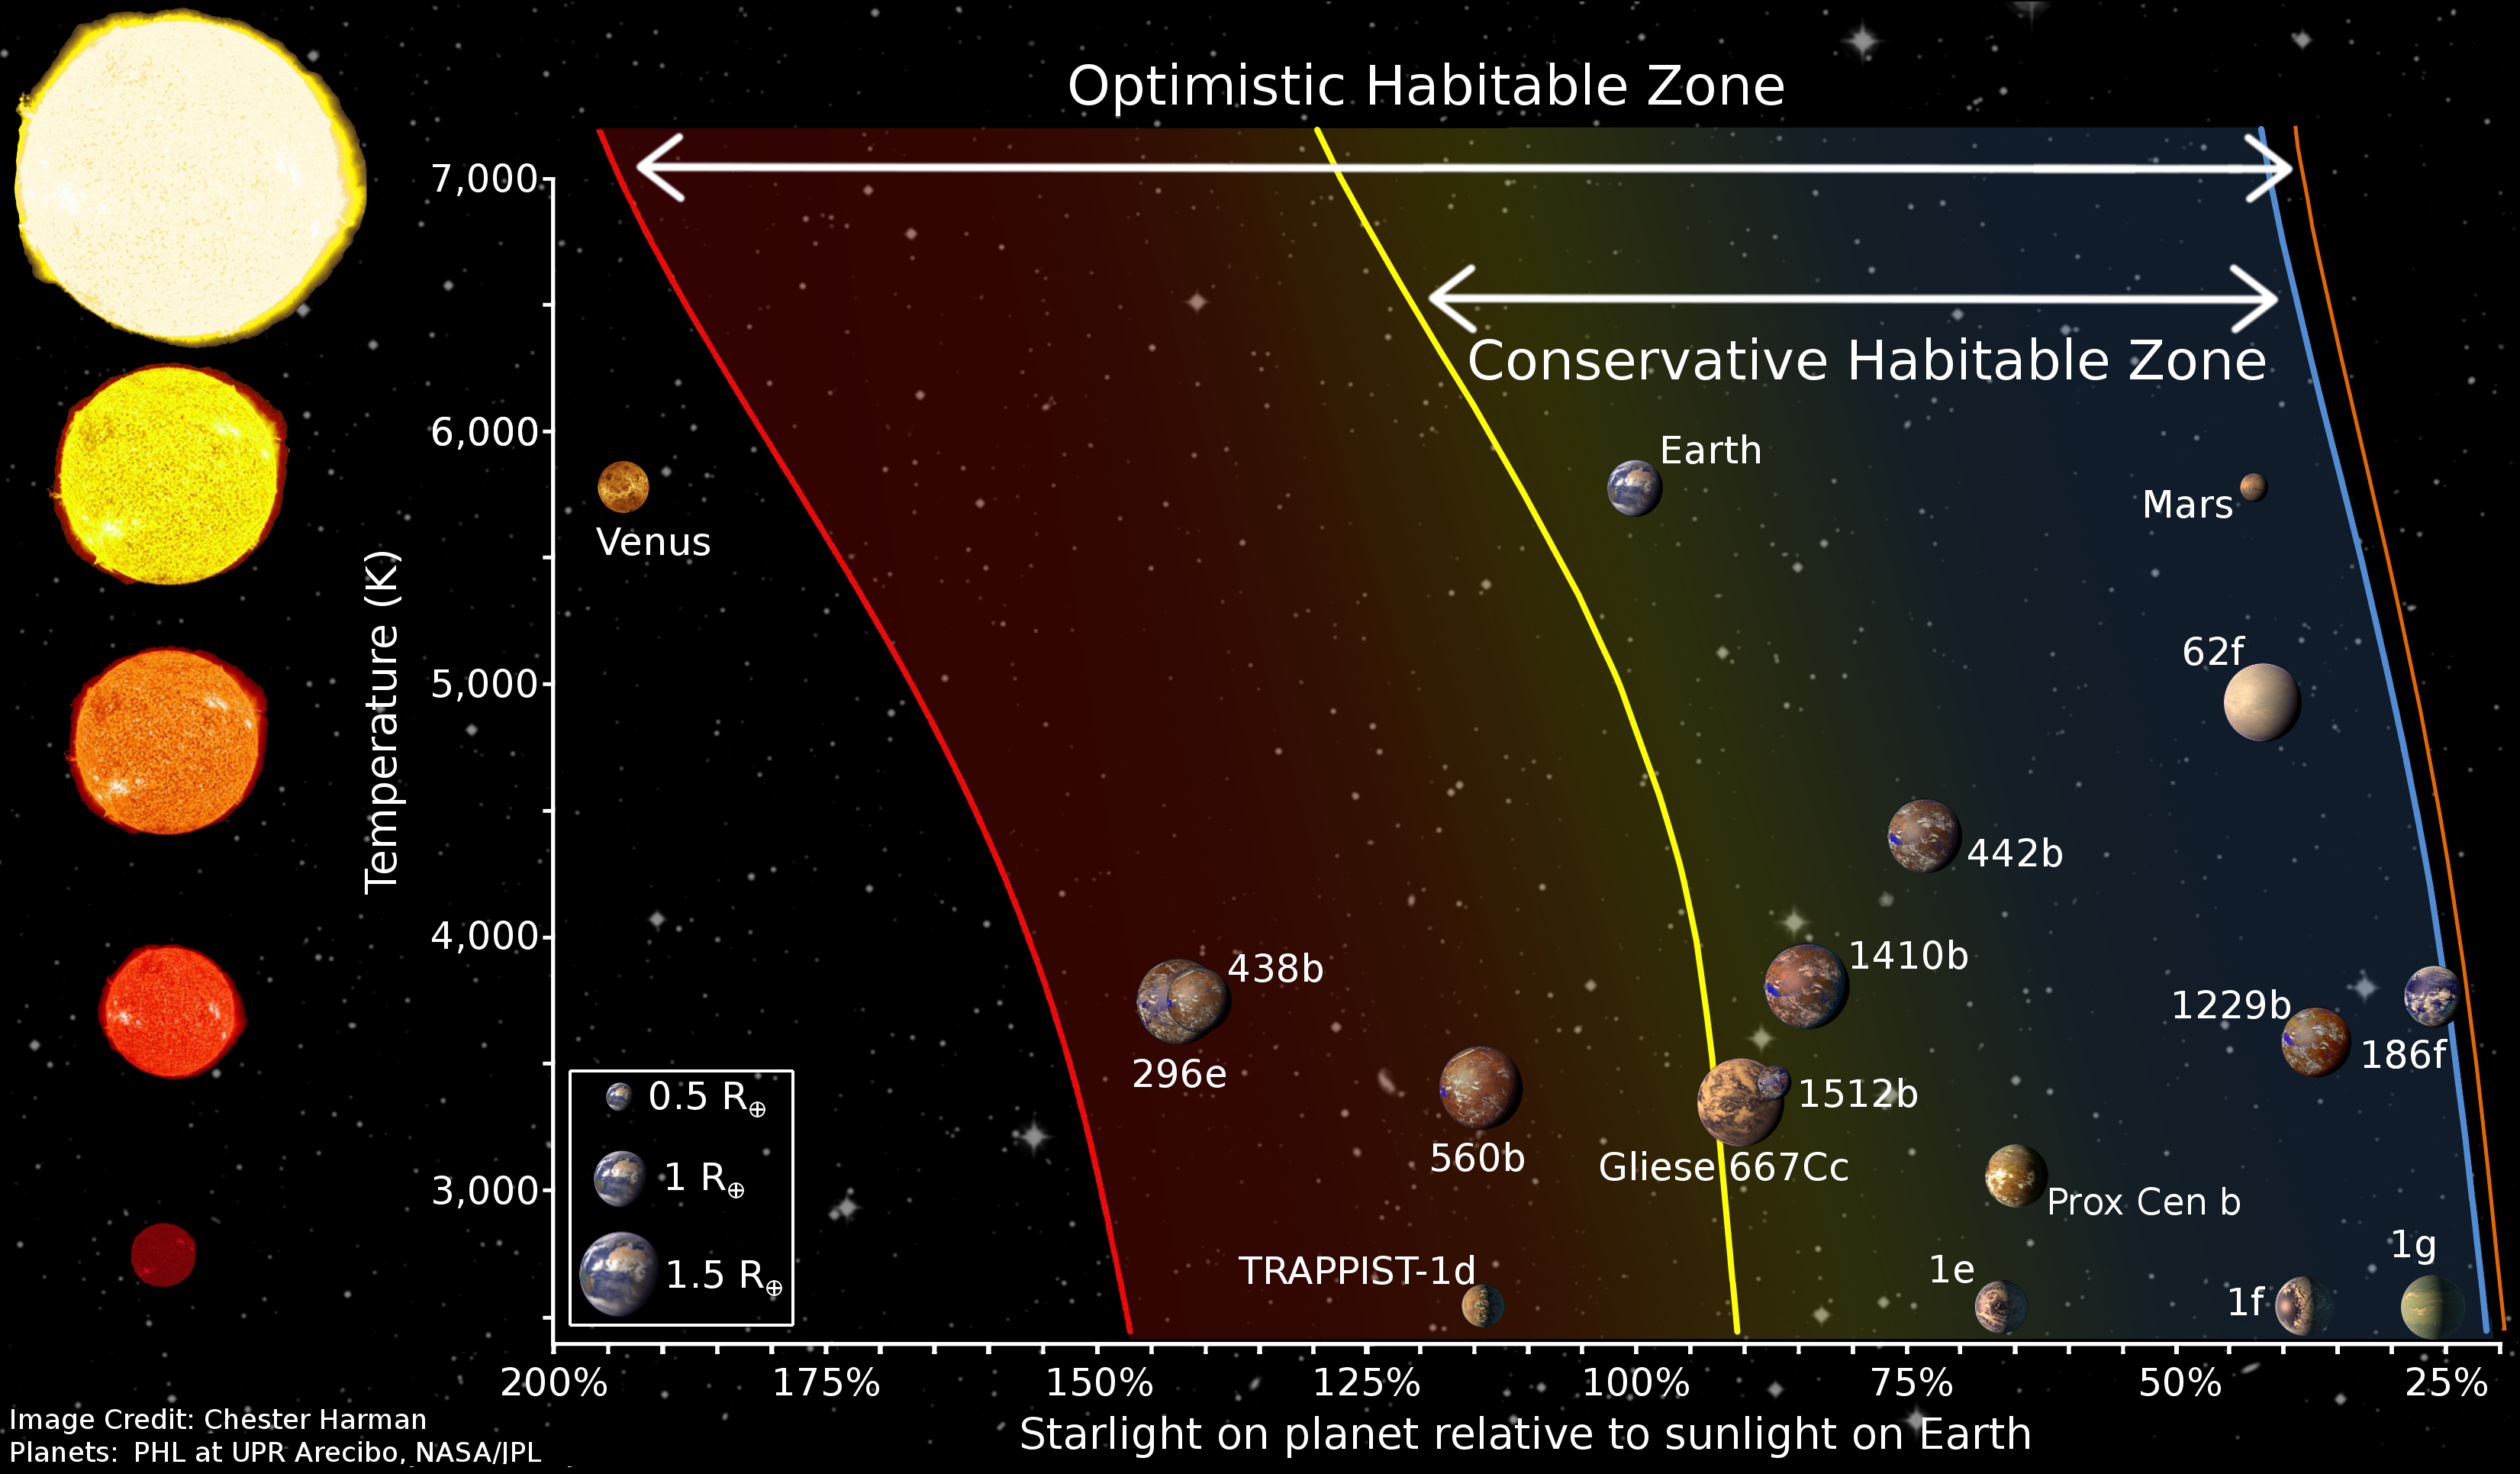 <span style='font-size:16px;position:relative;top:-50px'>[Chester Harman via Wikimedia Commons](https://en.wikipedia.org/wiki/File:Diagram_of_different_habitable_zone_regions_by_Chester_Harman.jpg)</span>